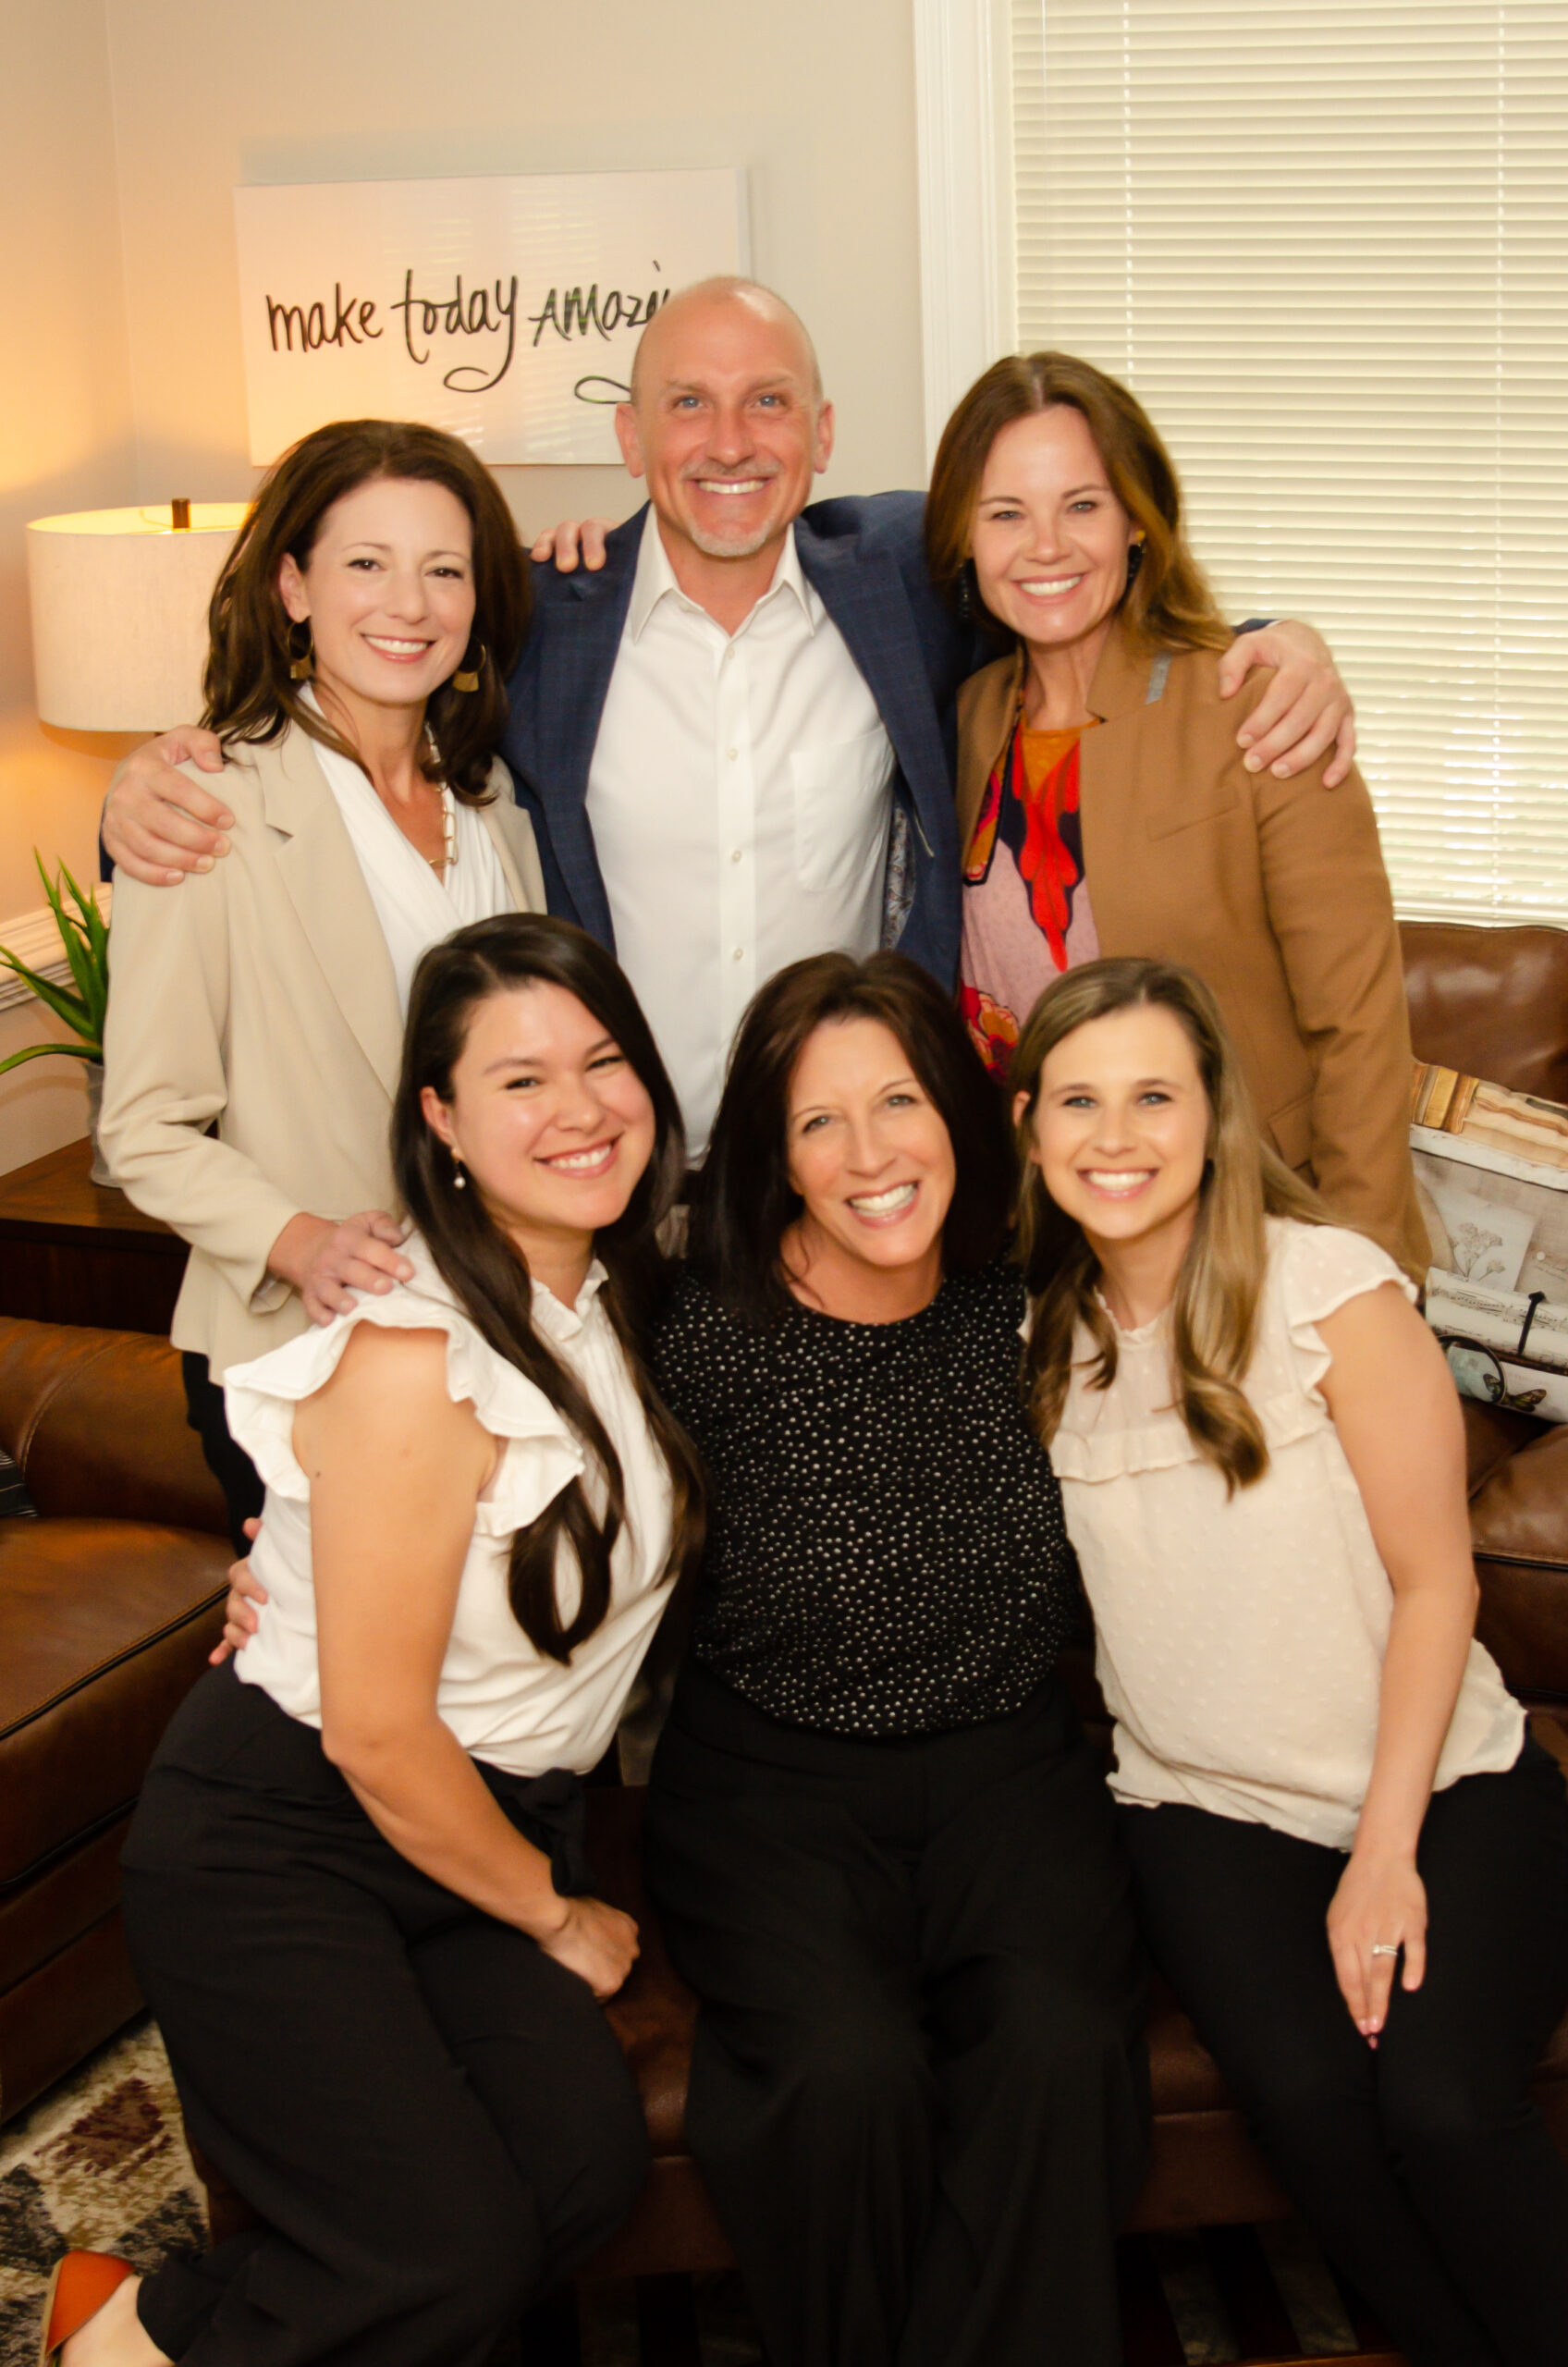 Dr. Bob and Dr. Sarah with (left to right) Claire, Karen, Traci, and Kathryn